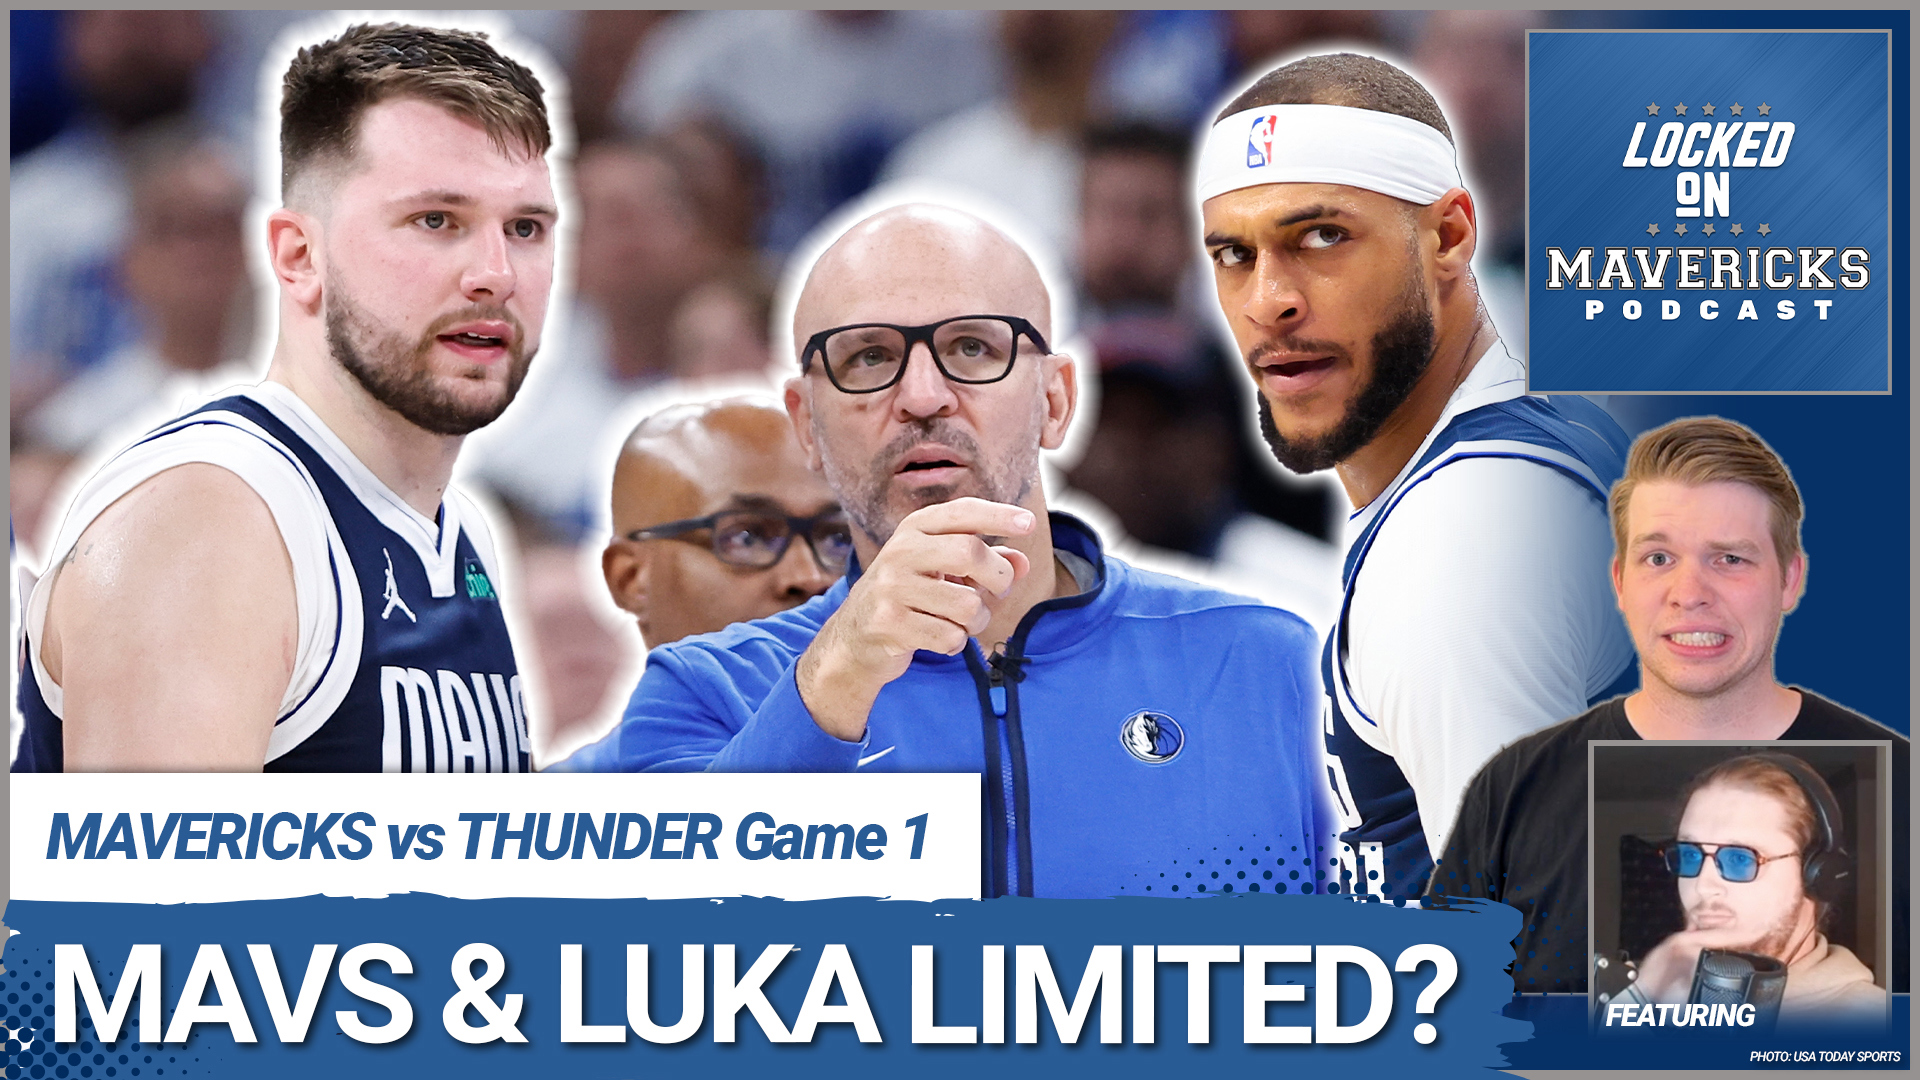 Nick Angstadt & Slightly Biased react to the Dallas Mavericks Game 1 loss to the OKC Thunder and Luka Doncic not playing 100%.